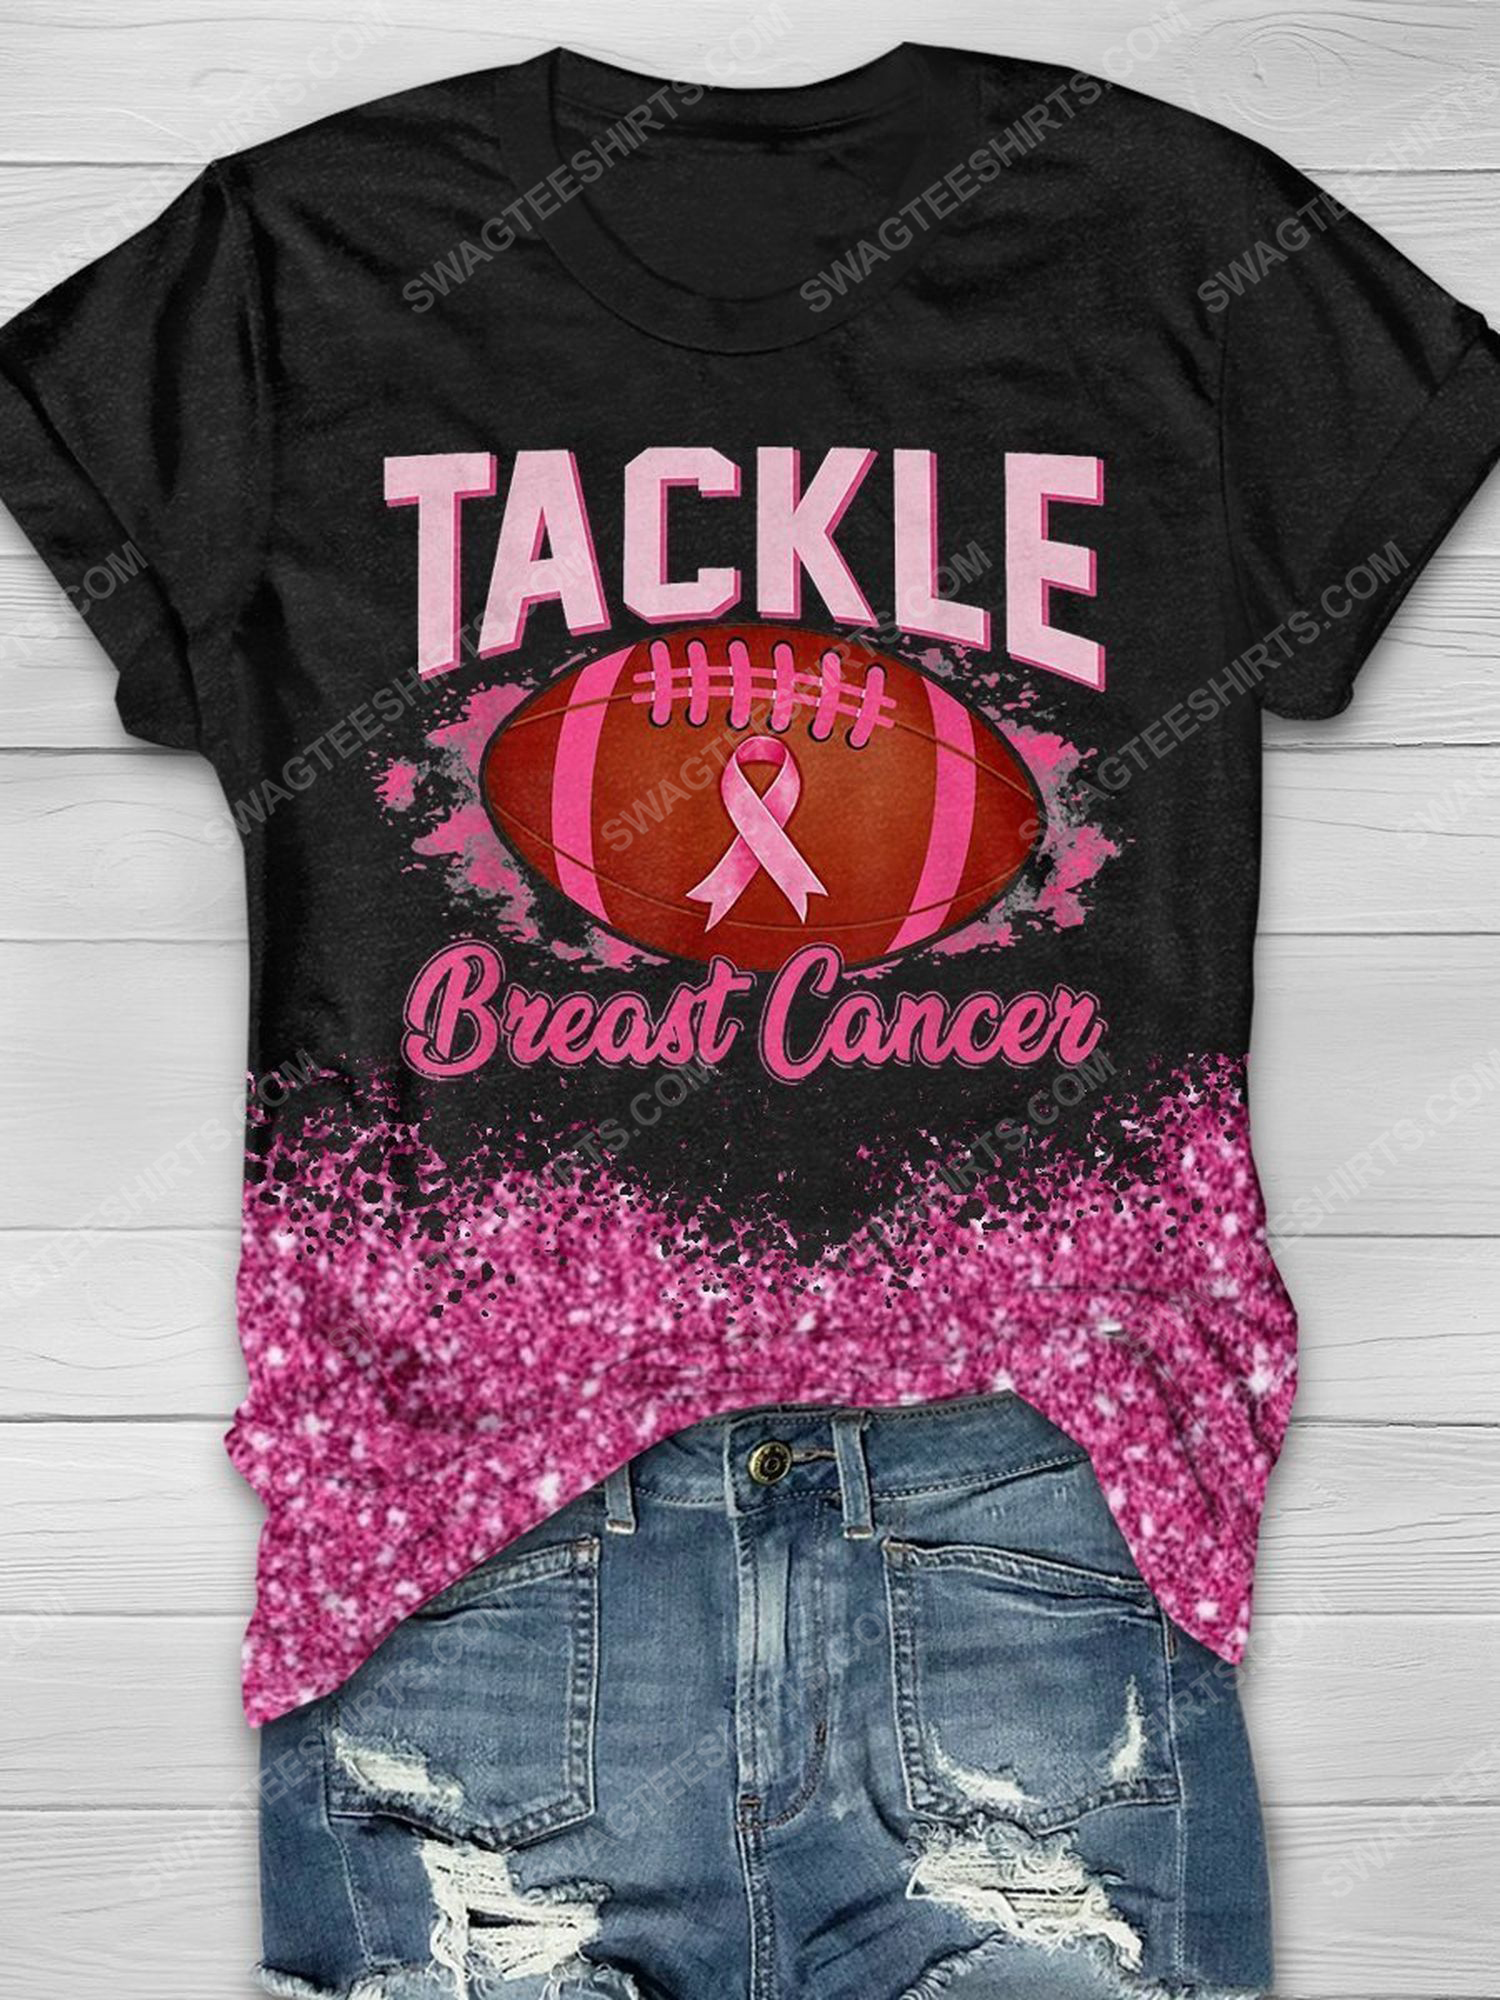 Breast cancer awareness tackle football breast cancer full print shirt 1 - Copy (2)